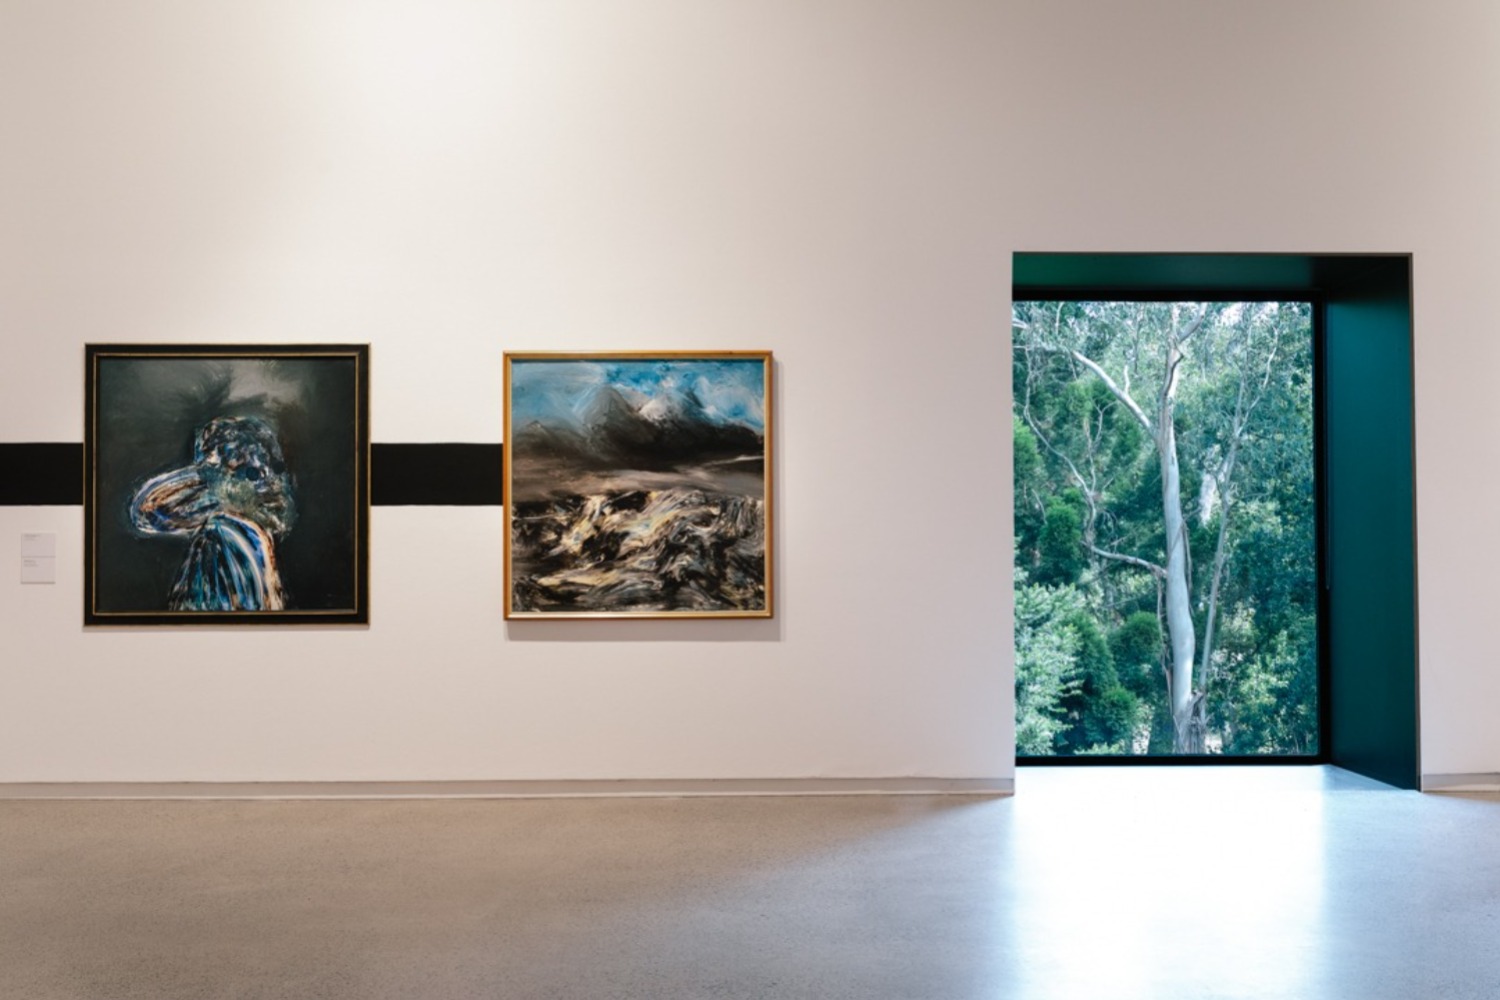 Sidney Nolan’s exhibition at Heide is now in its final weeks